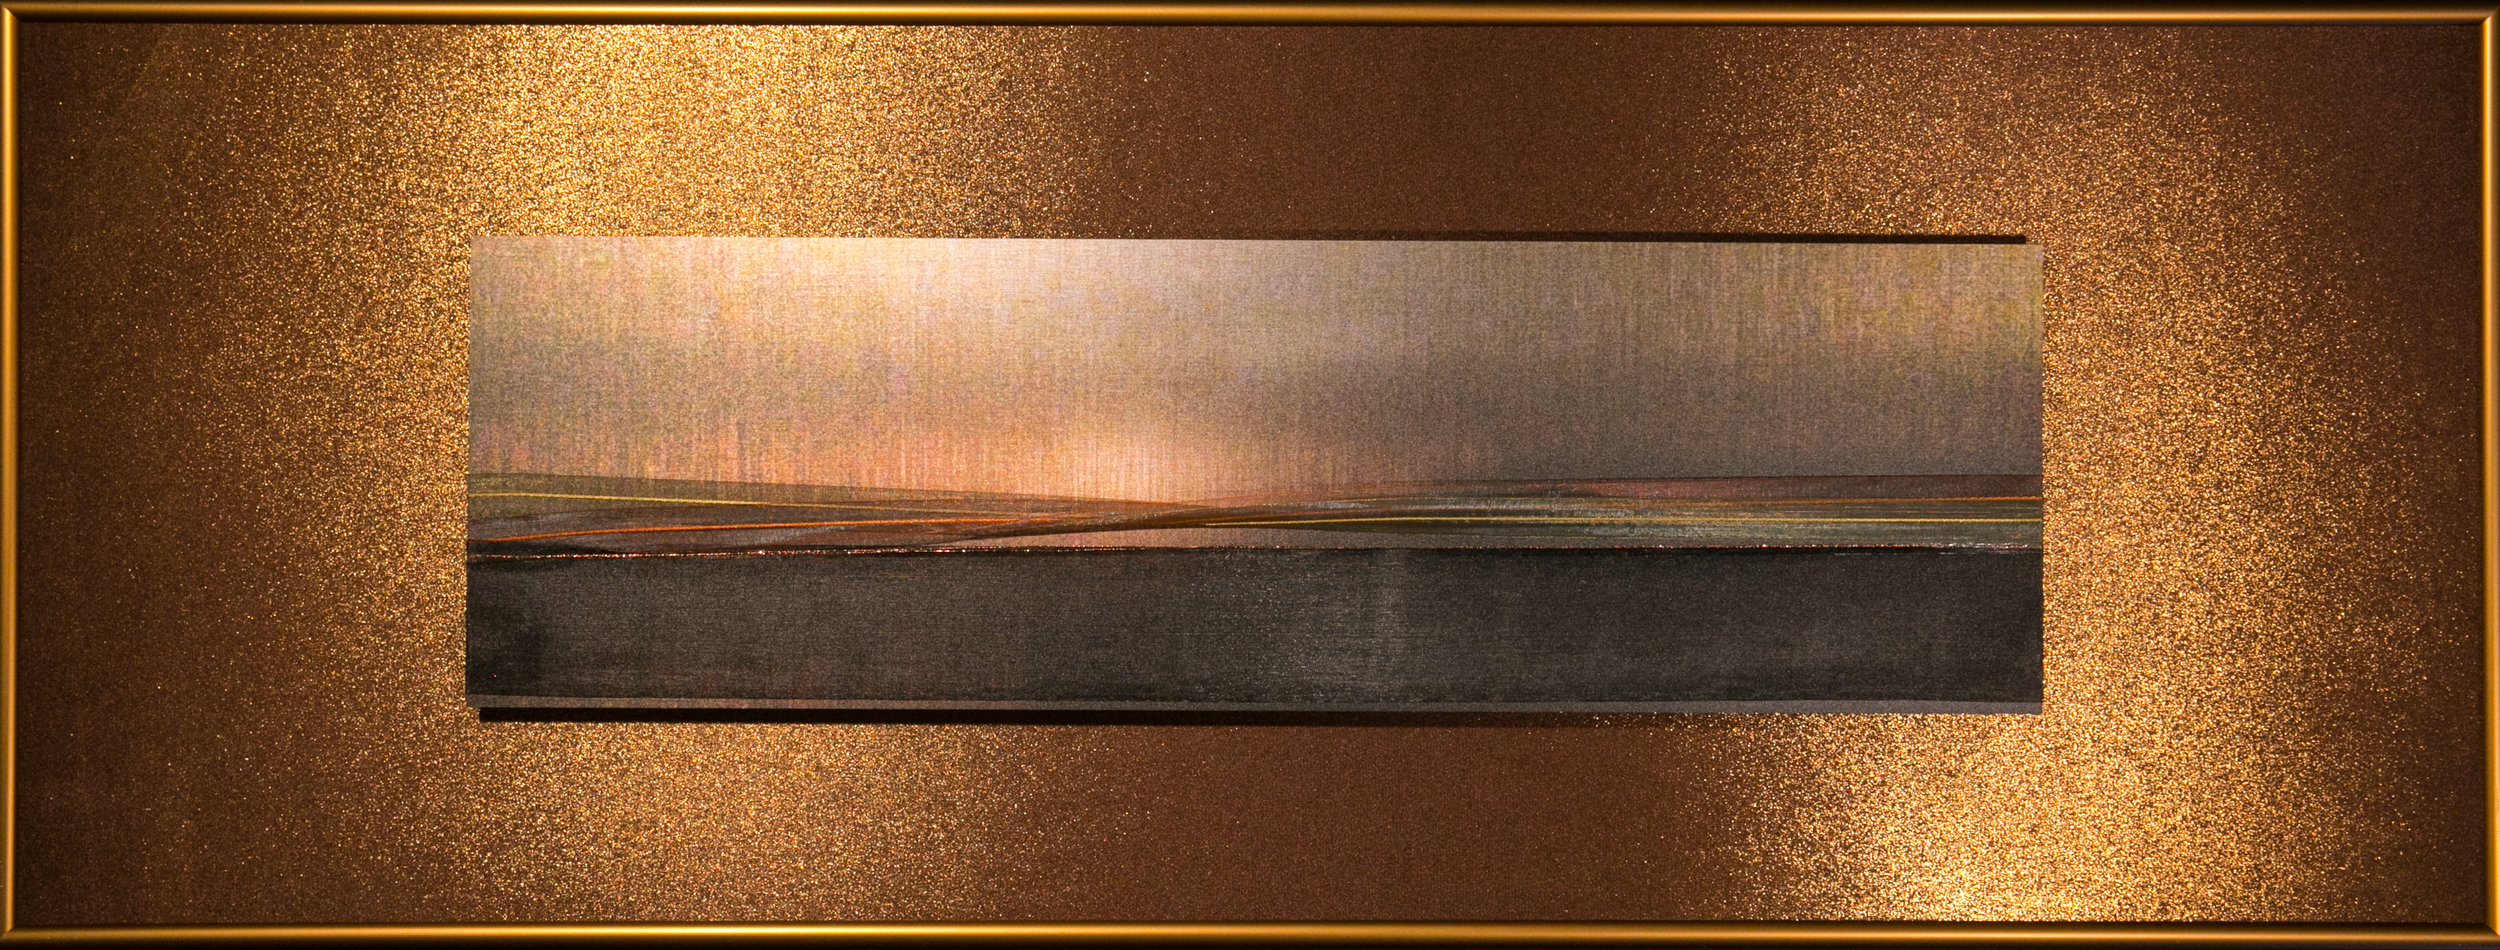   Skyscapes Series    Dusk   12” x 32”  Brushed Metal Print with Silks  2018 